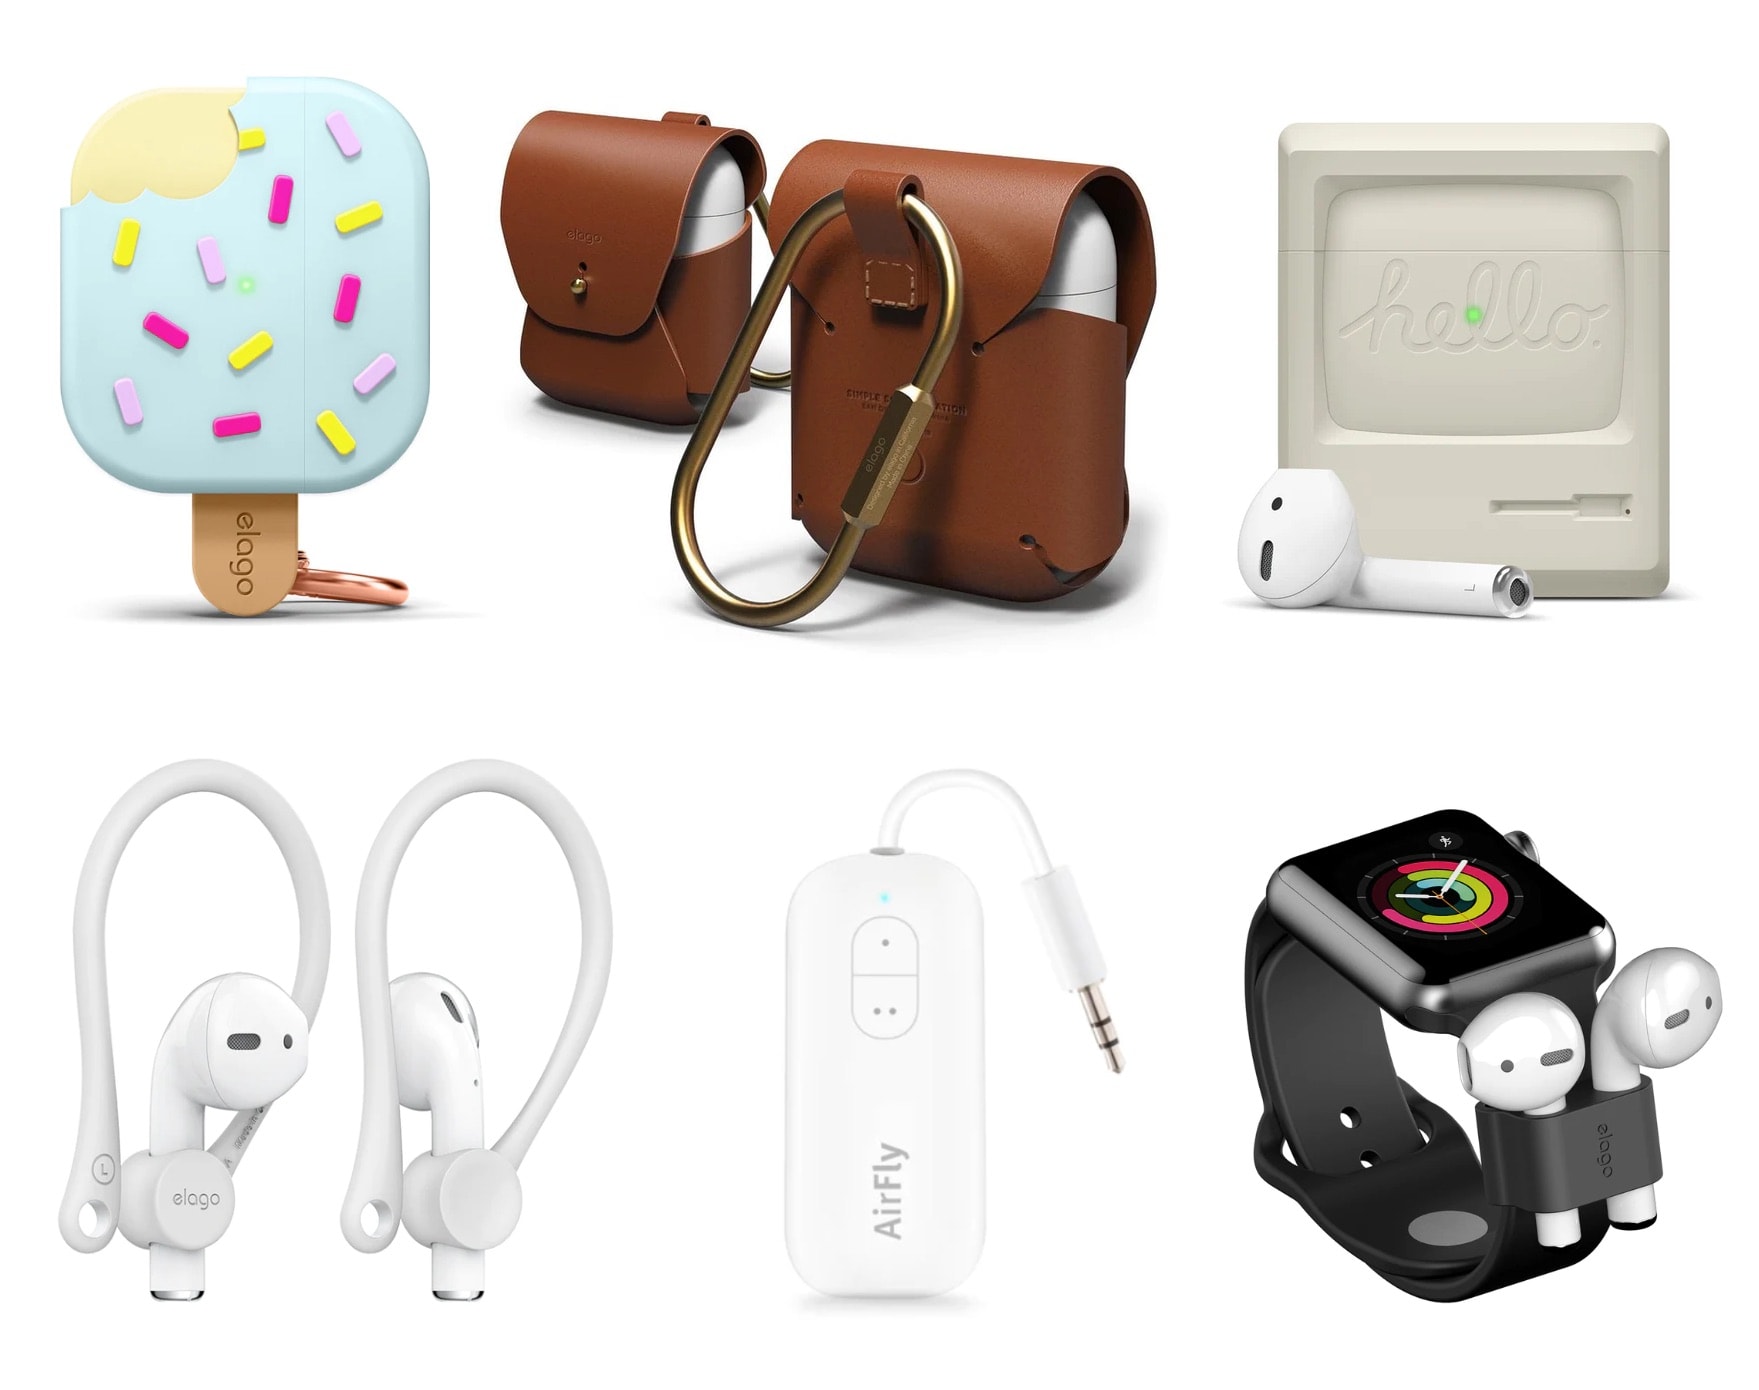 AirPods accessories available on the Cult of Mac Store